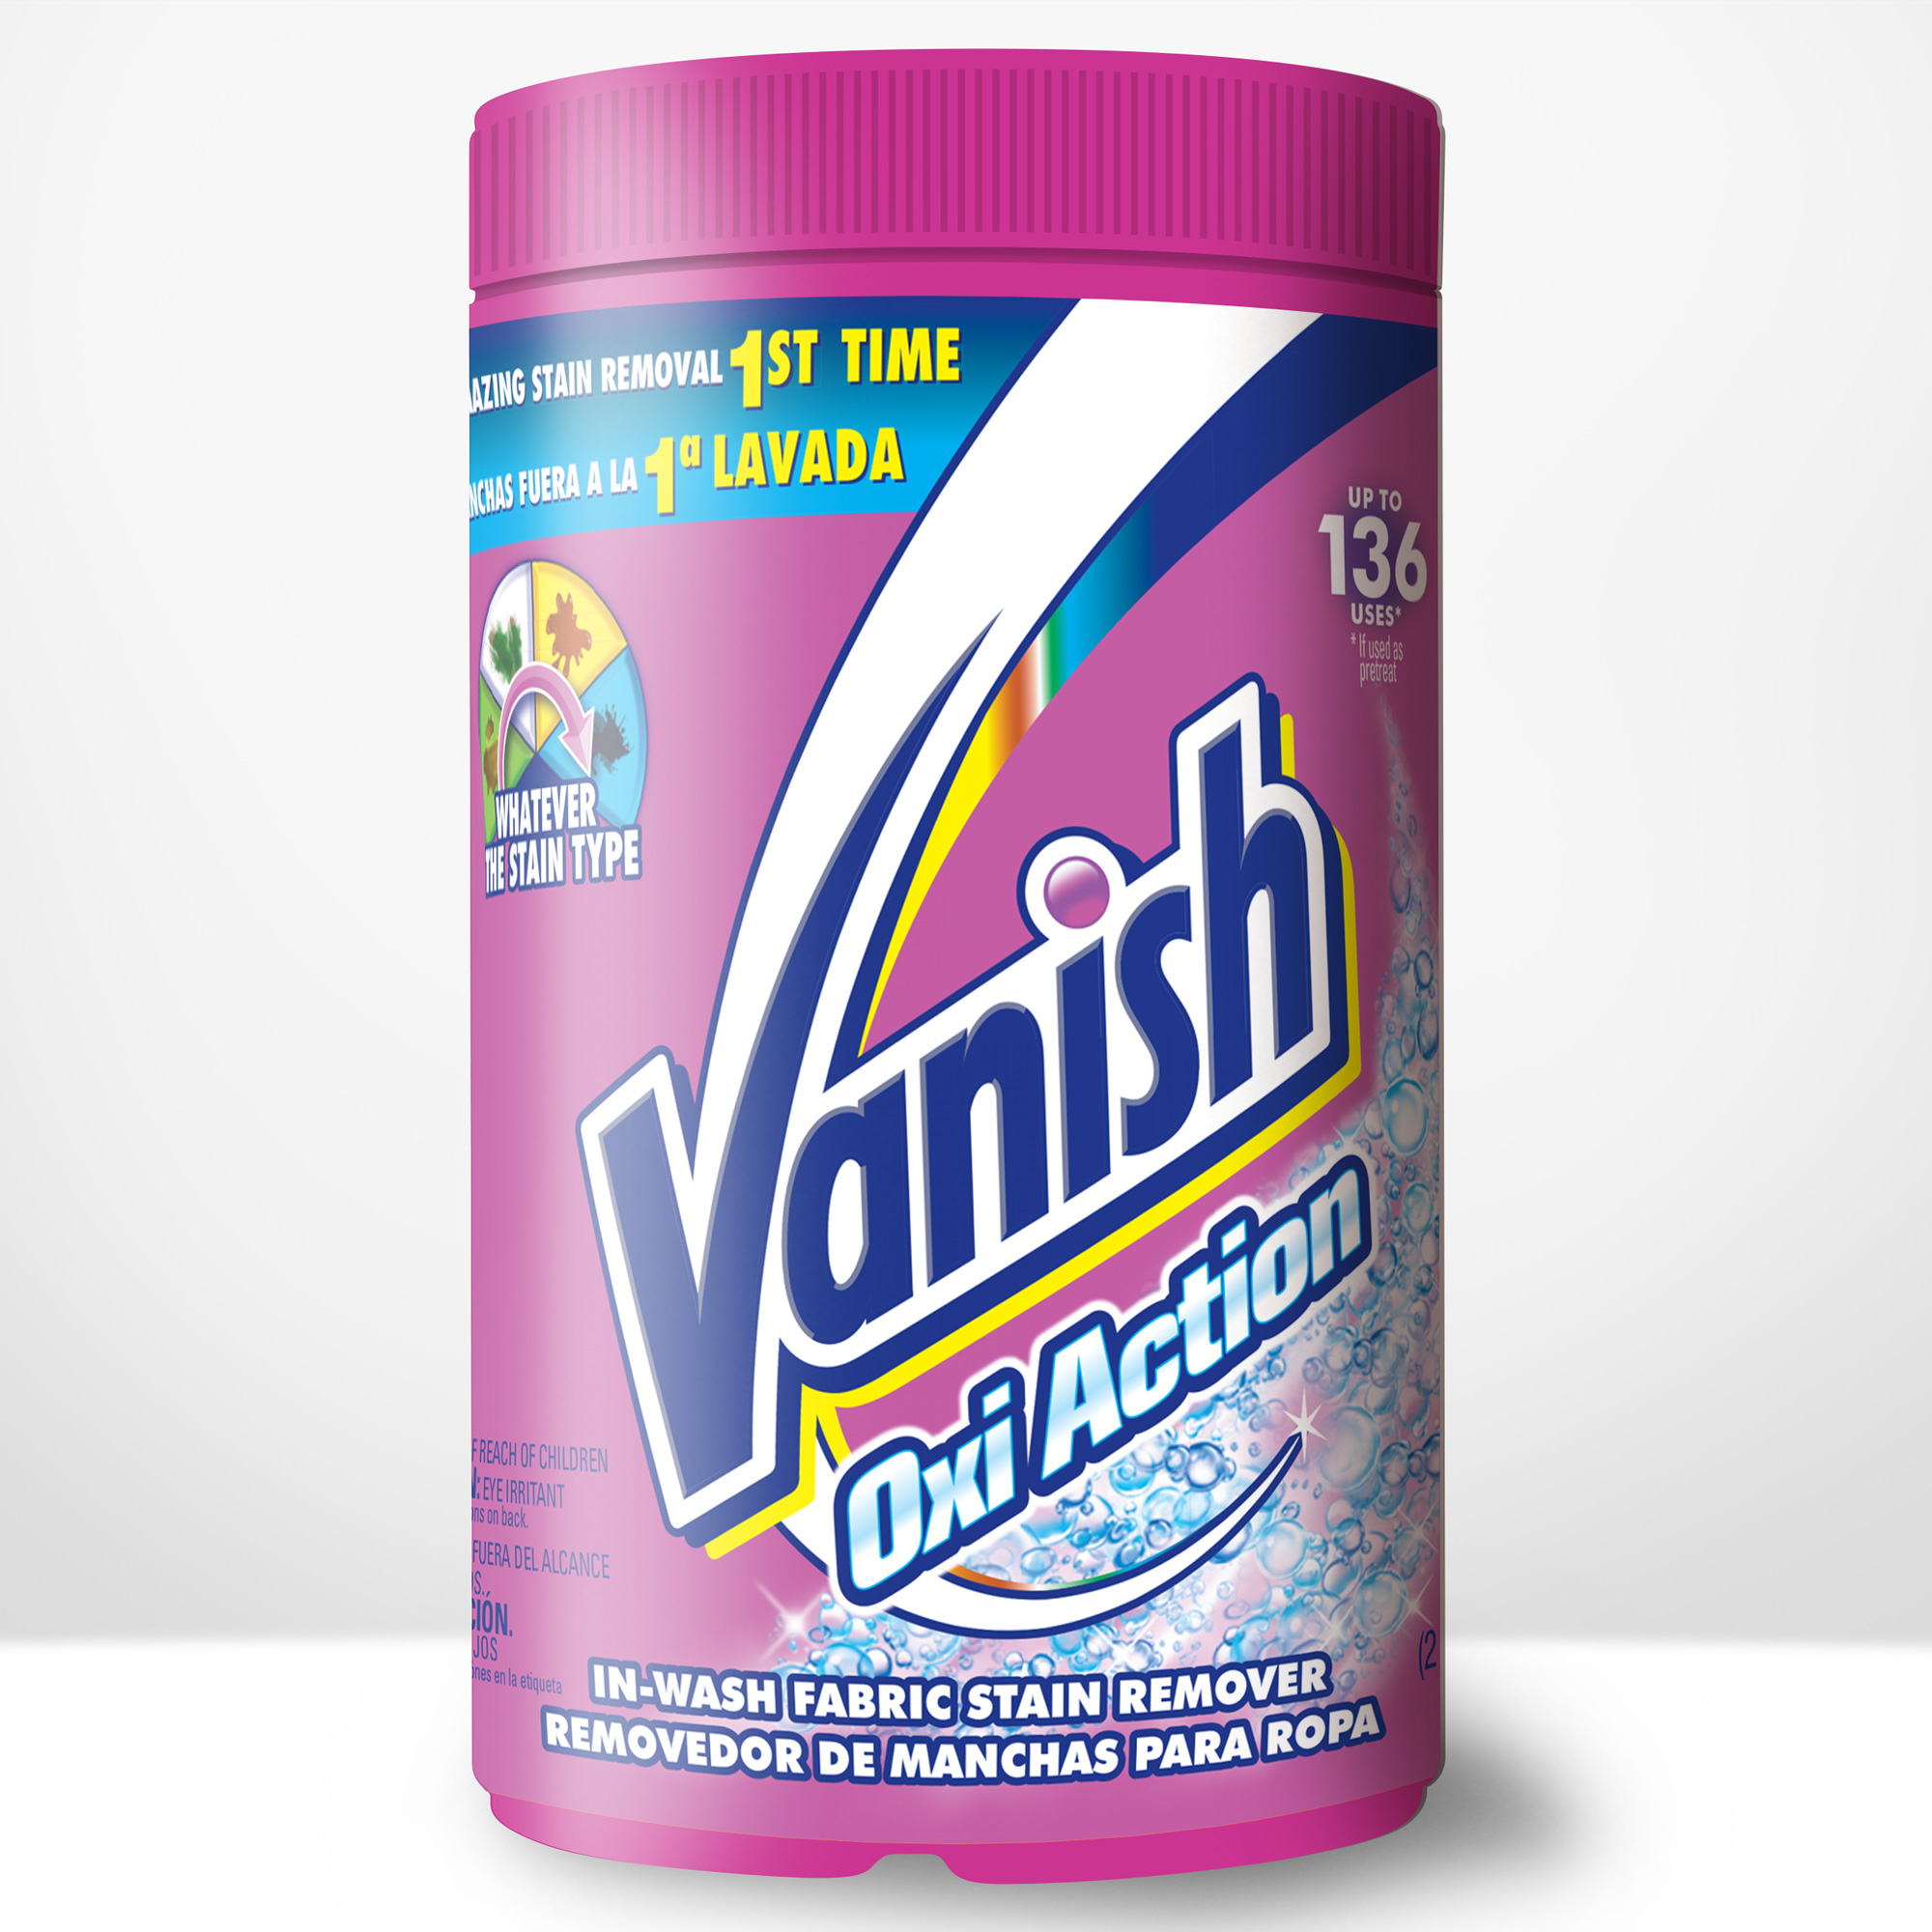 VANISH Oxi Action InWash Fabric Stain Remover